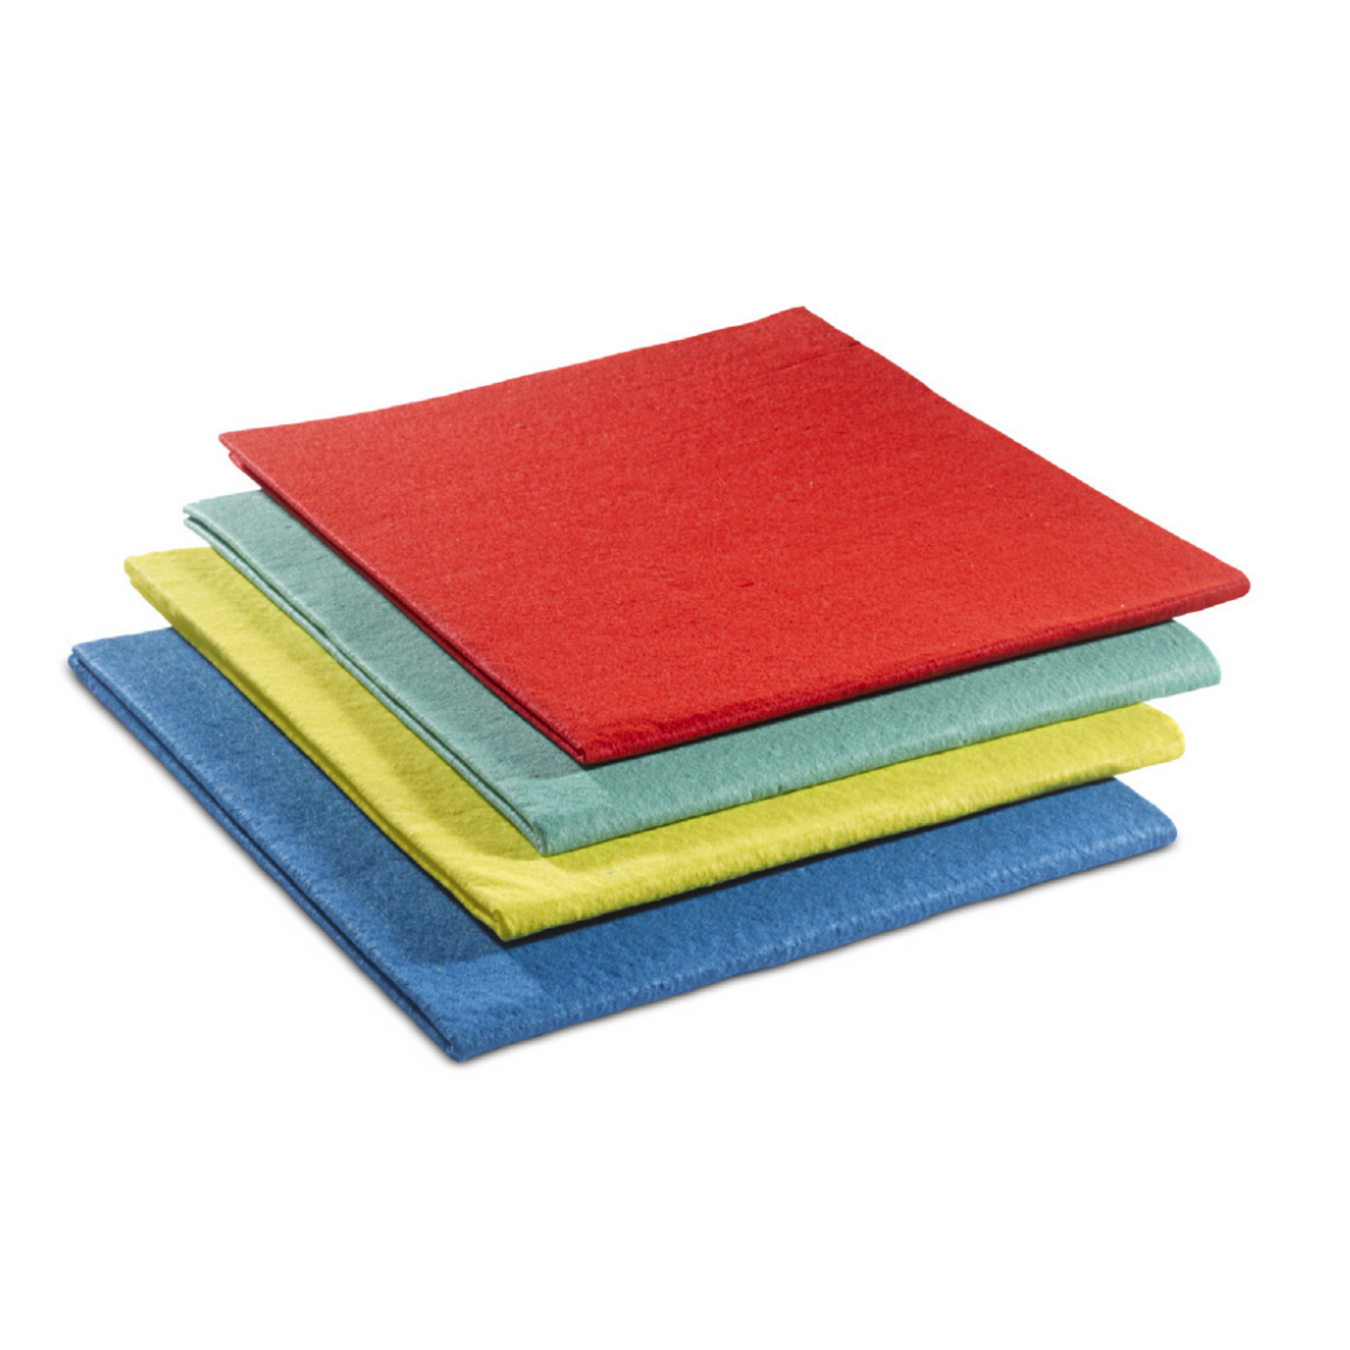 microfiber cleaning tools